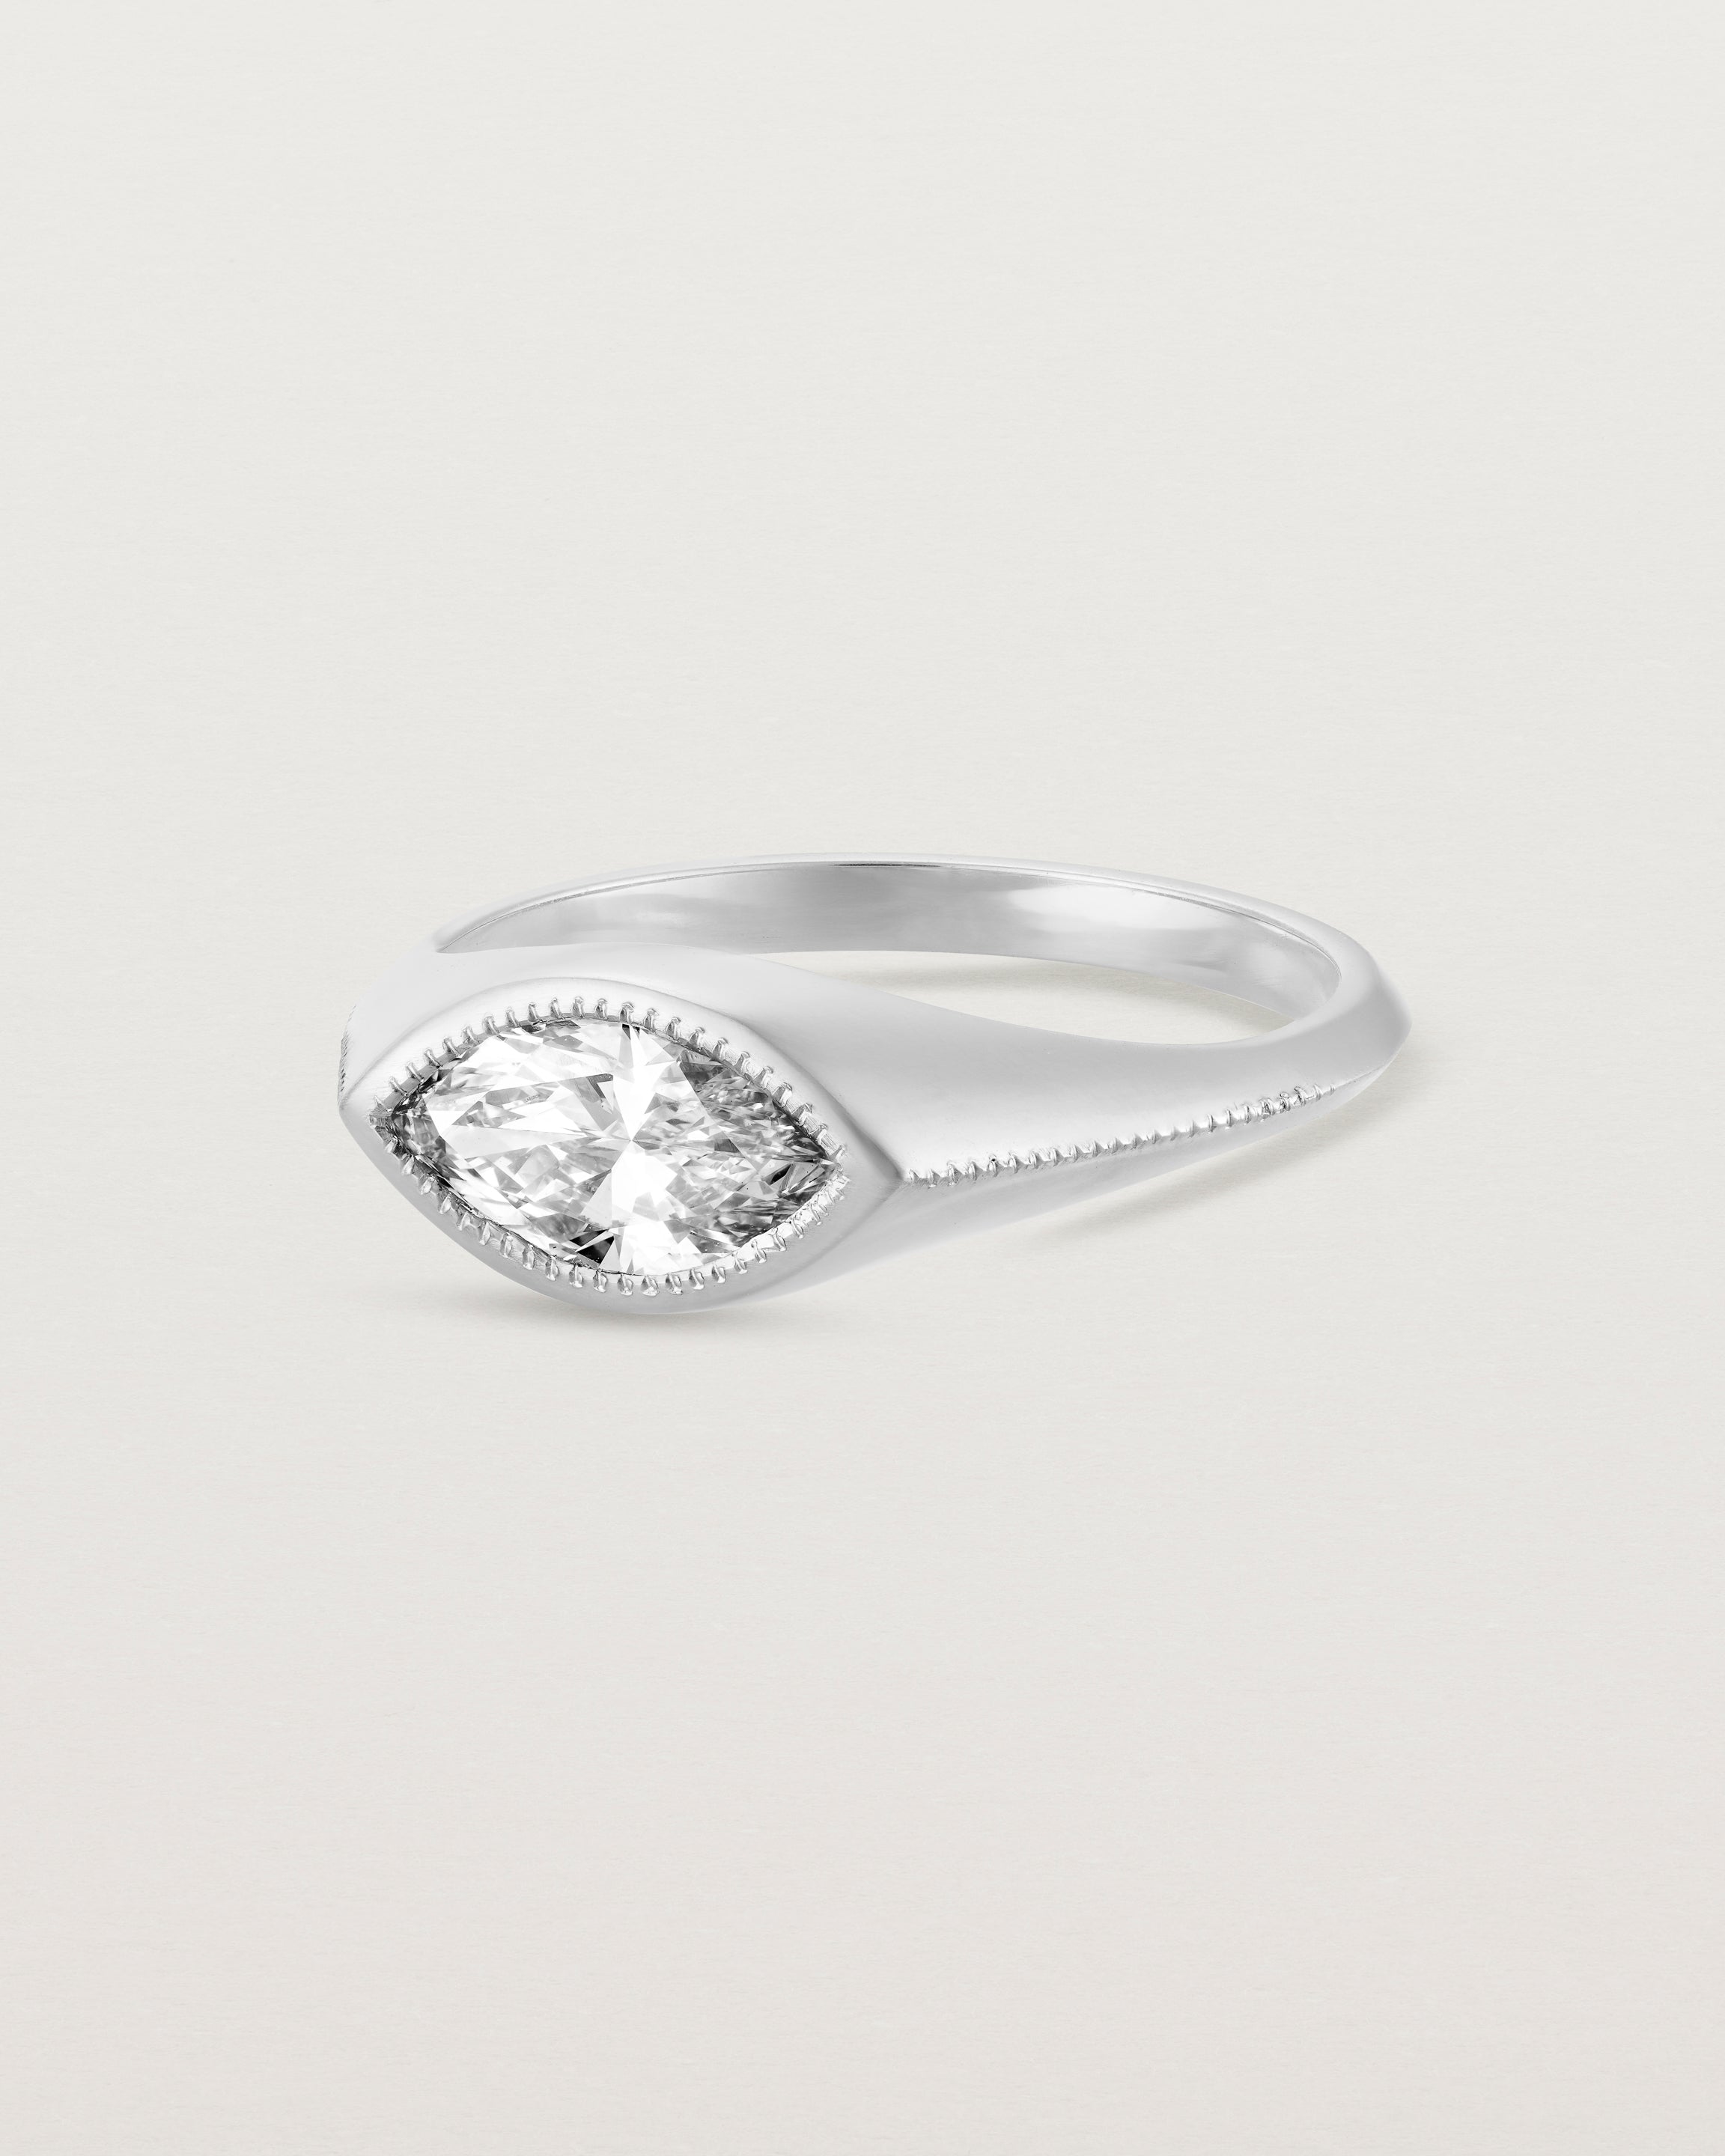 Angled view of the Átlas Marquise Signet | Laboratory Grown Diamond in white gold, in a polished finish.